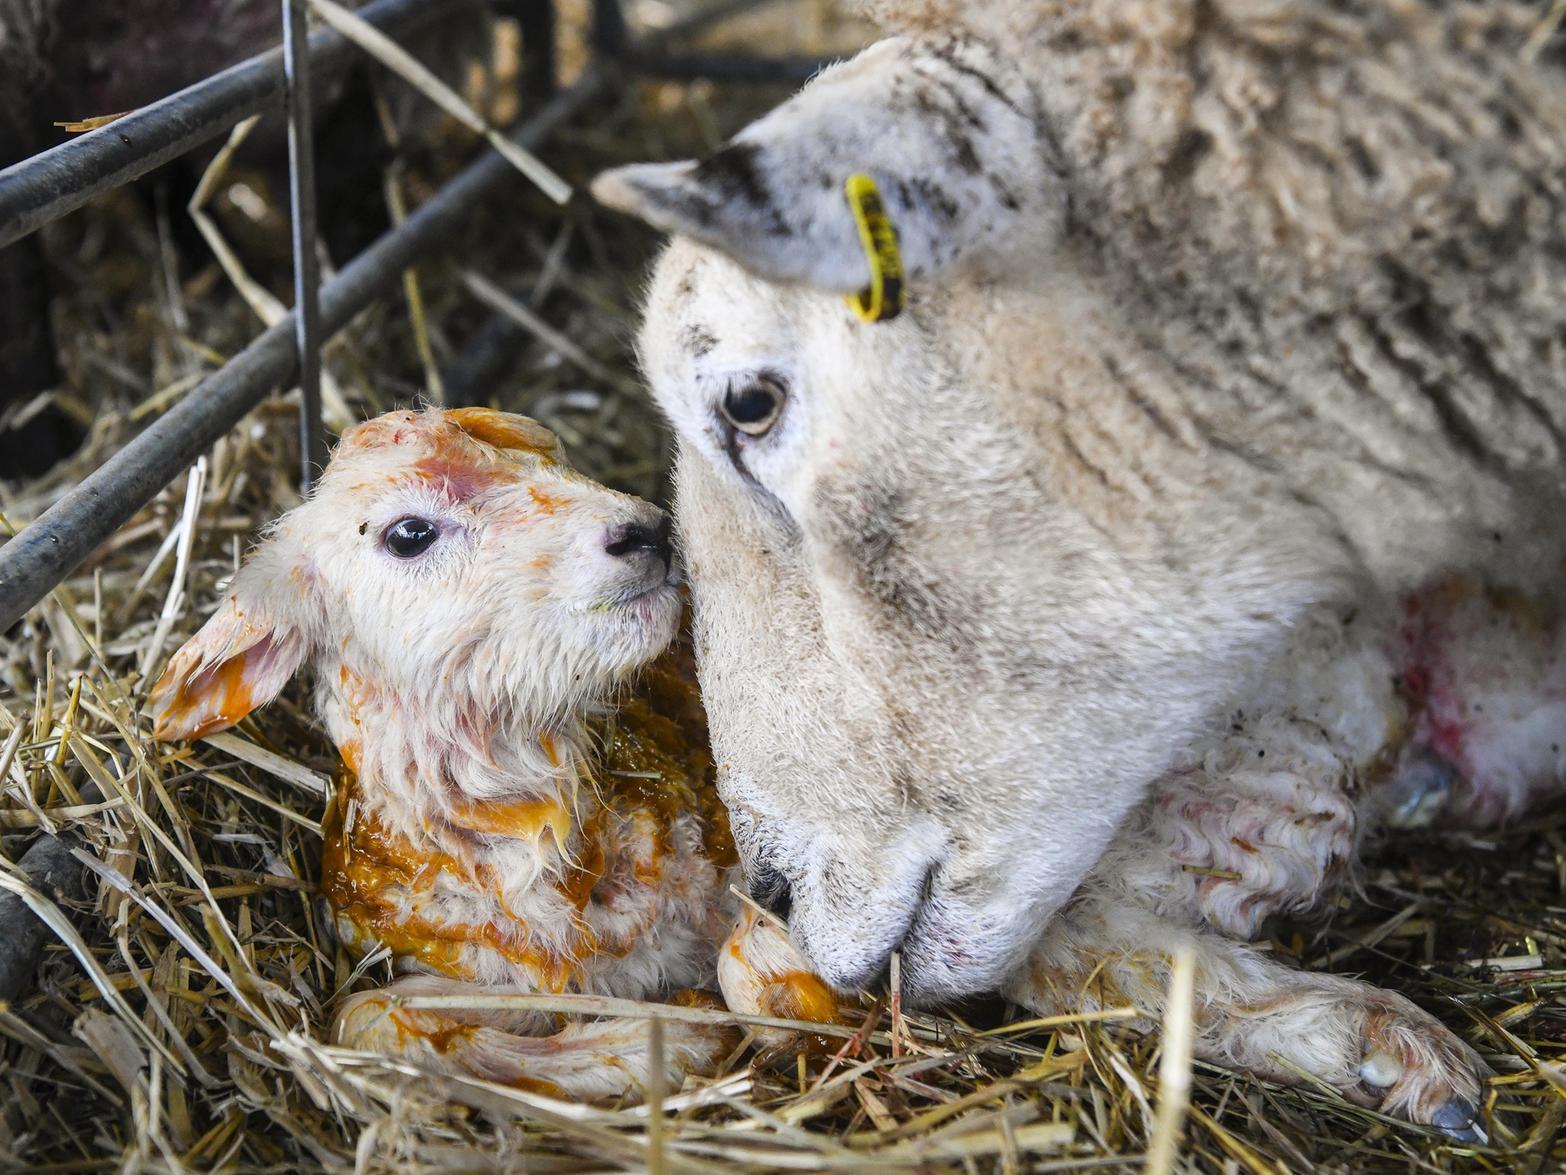 The pictures show the lambs just seconds after they were born.